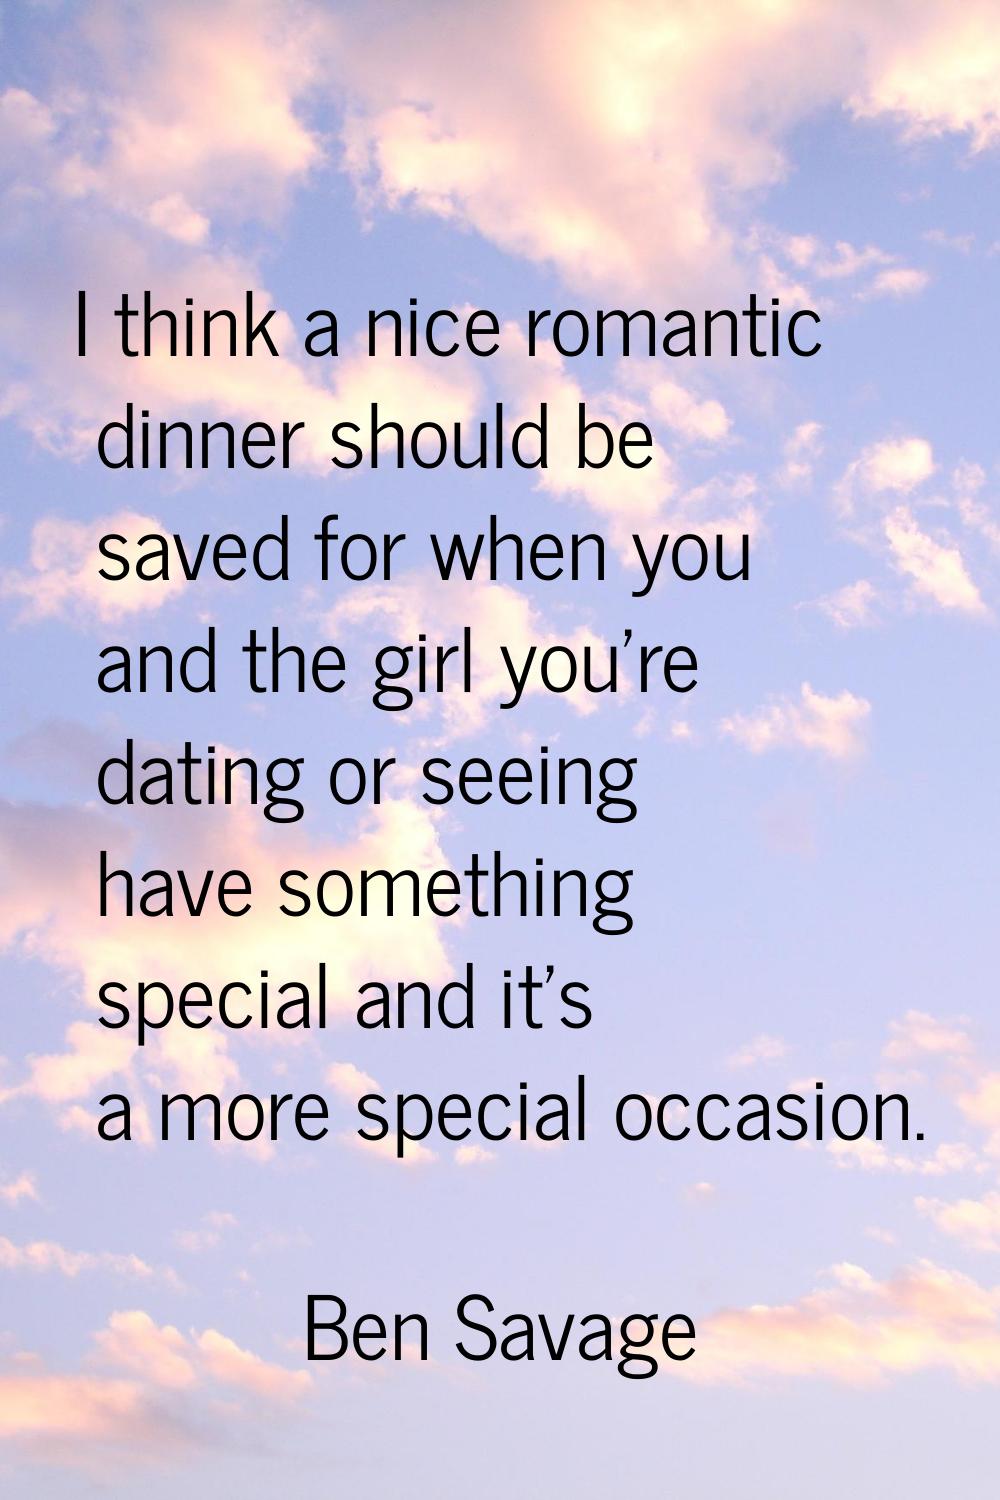 I think a nice romantic dinner should be saved for when you and the girl you're dating or seeing ha